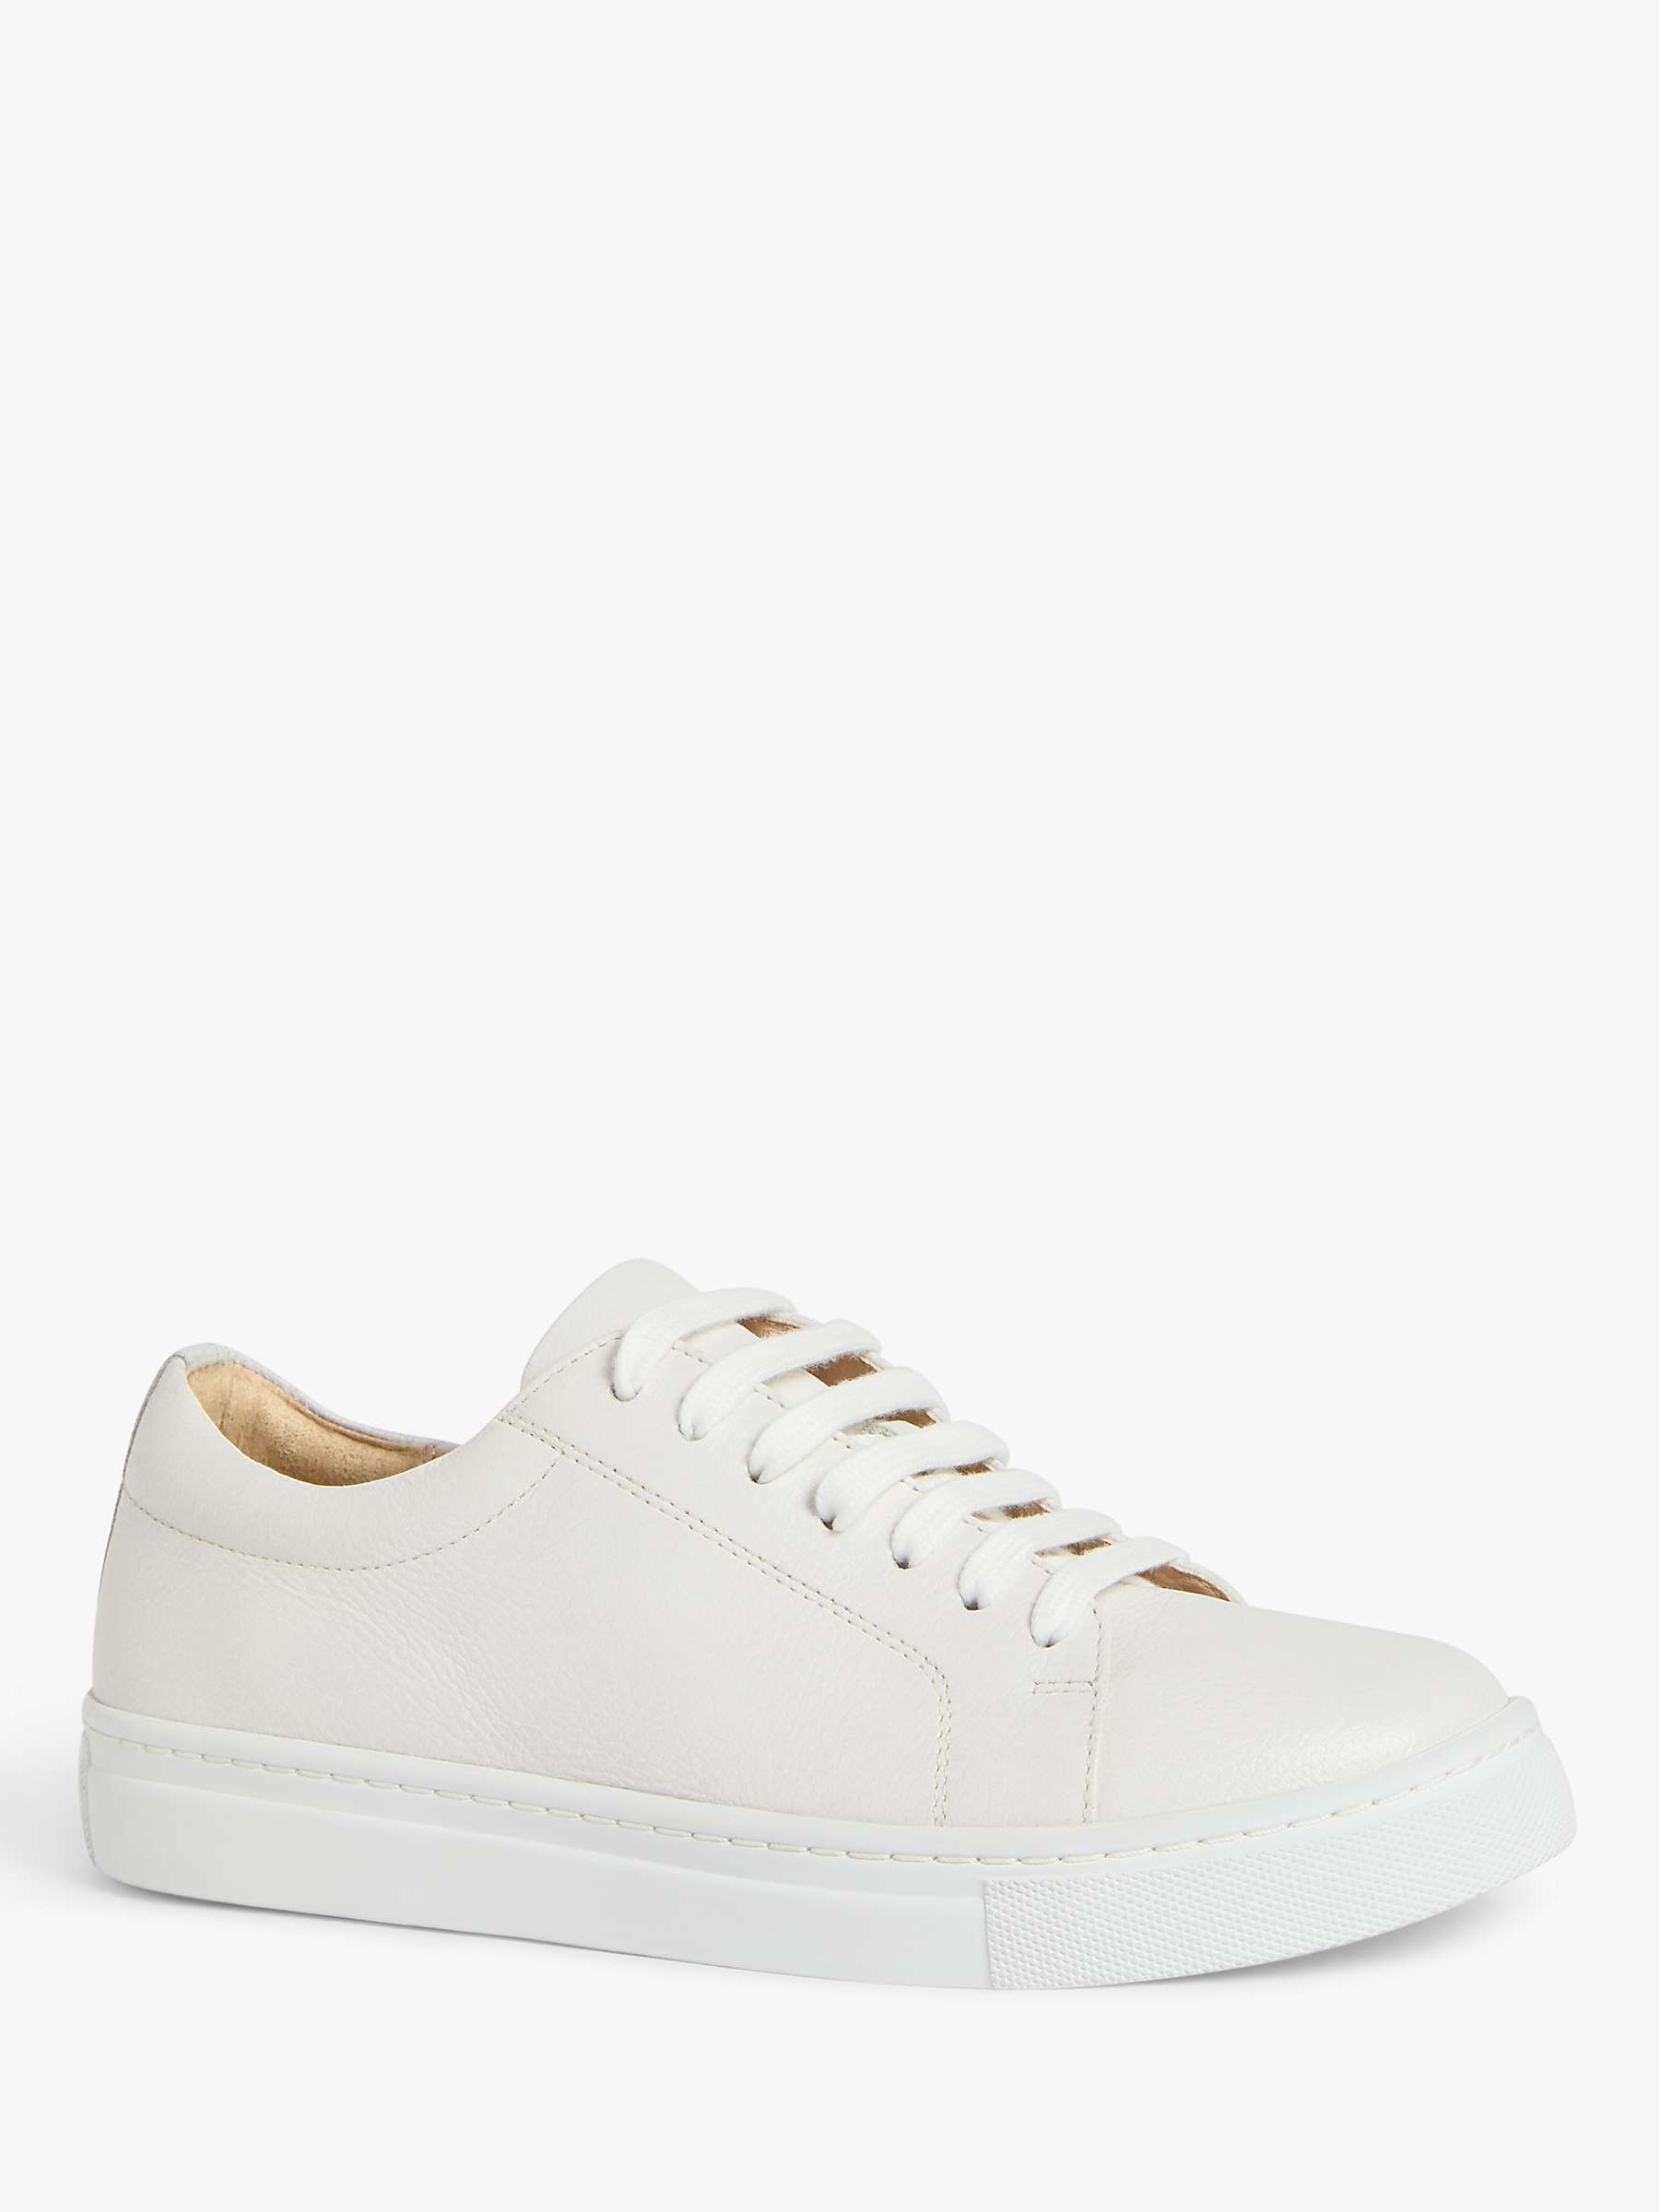 Buy John Lewis Florette Wide Fit Leather Trainers Online at johnlewis.com